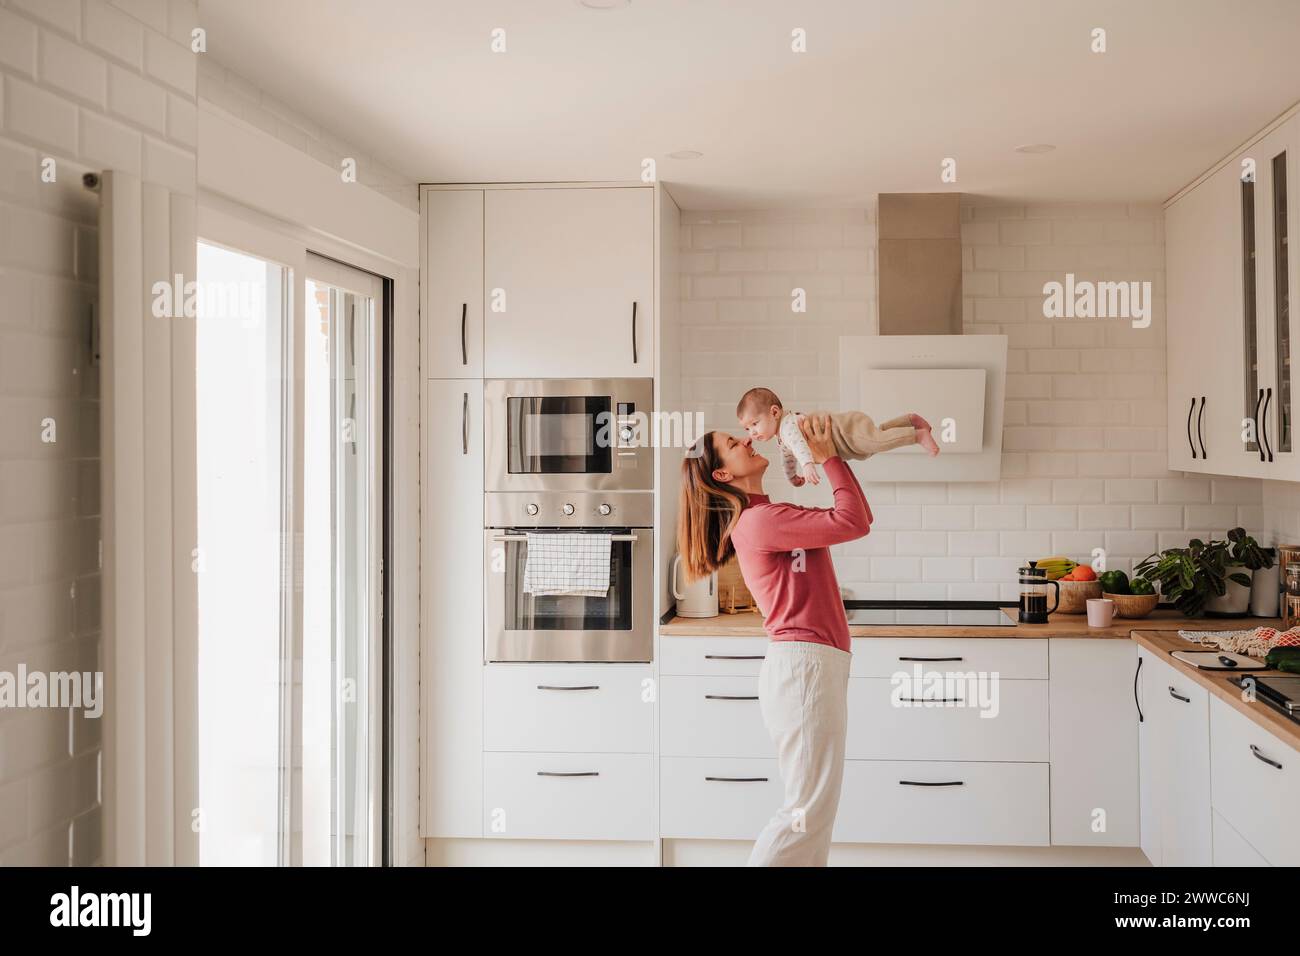 Smiling woman holding baby girl in kitchen at home Stock Photo